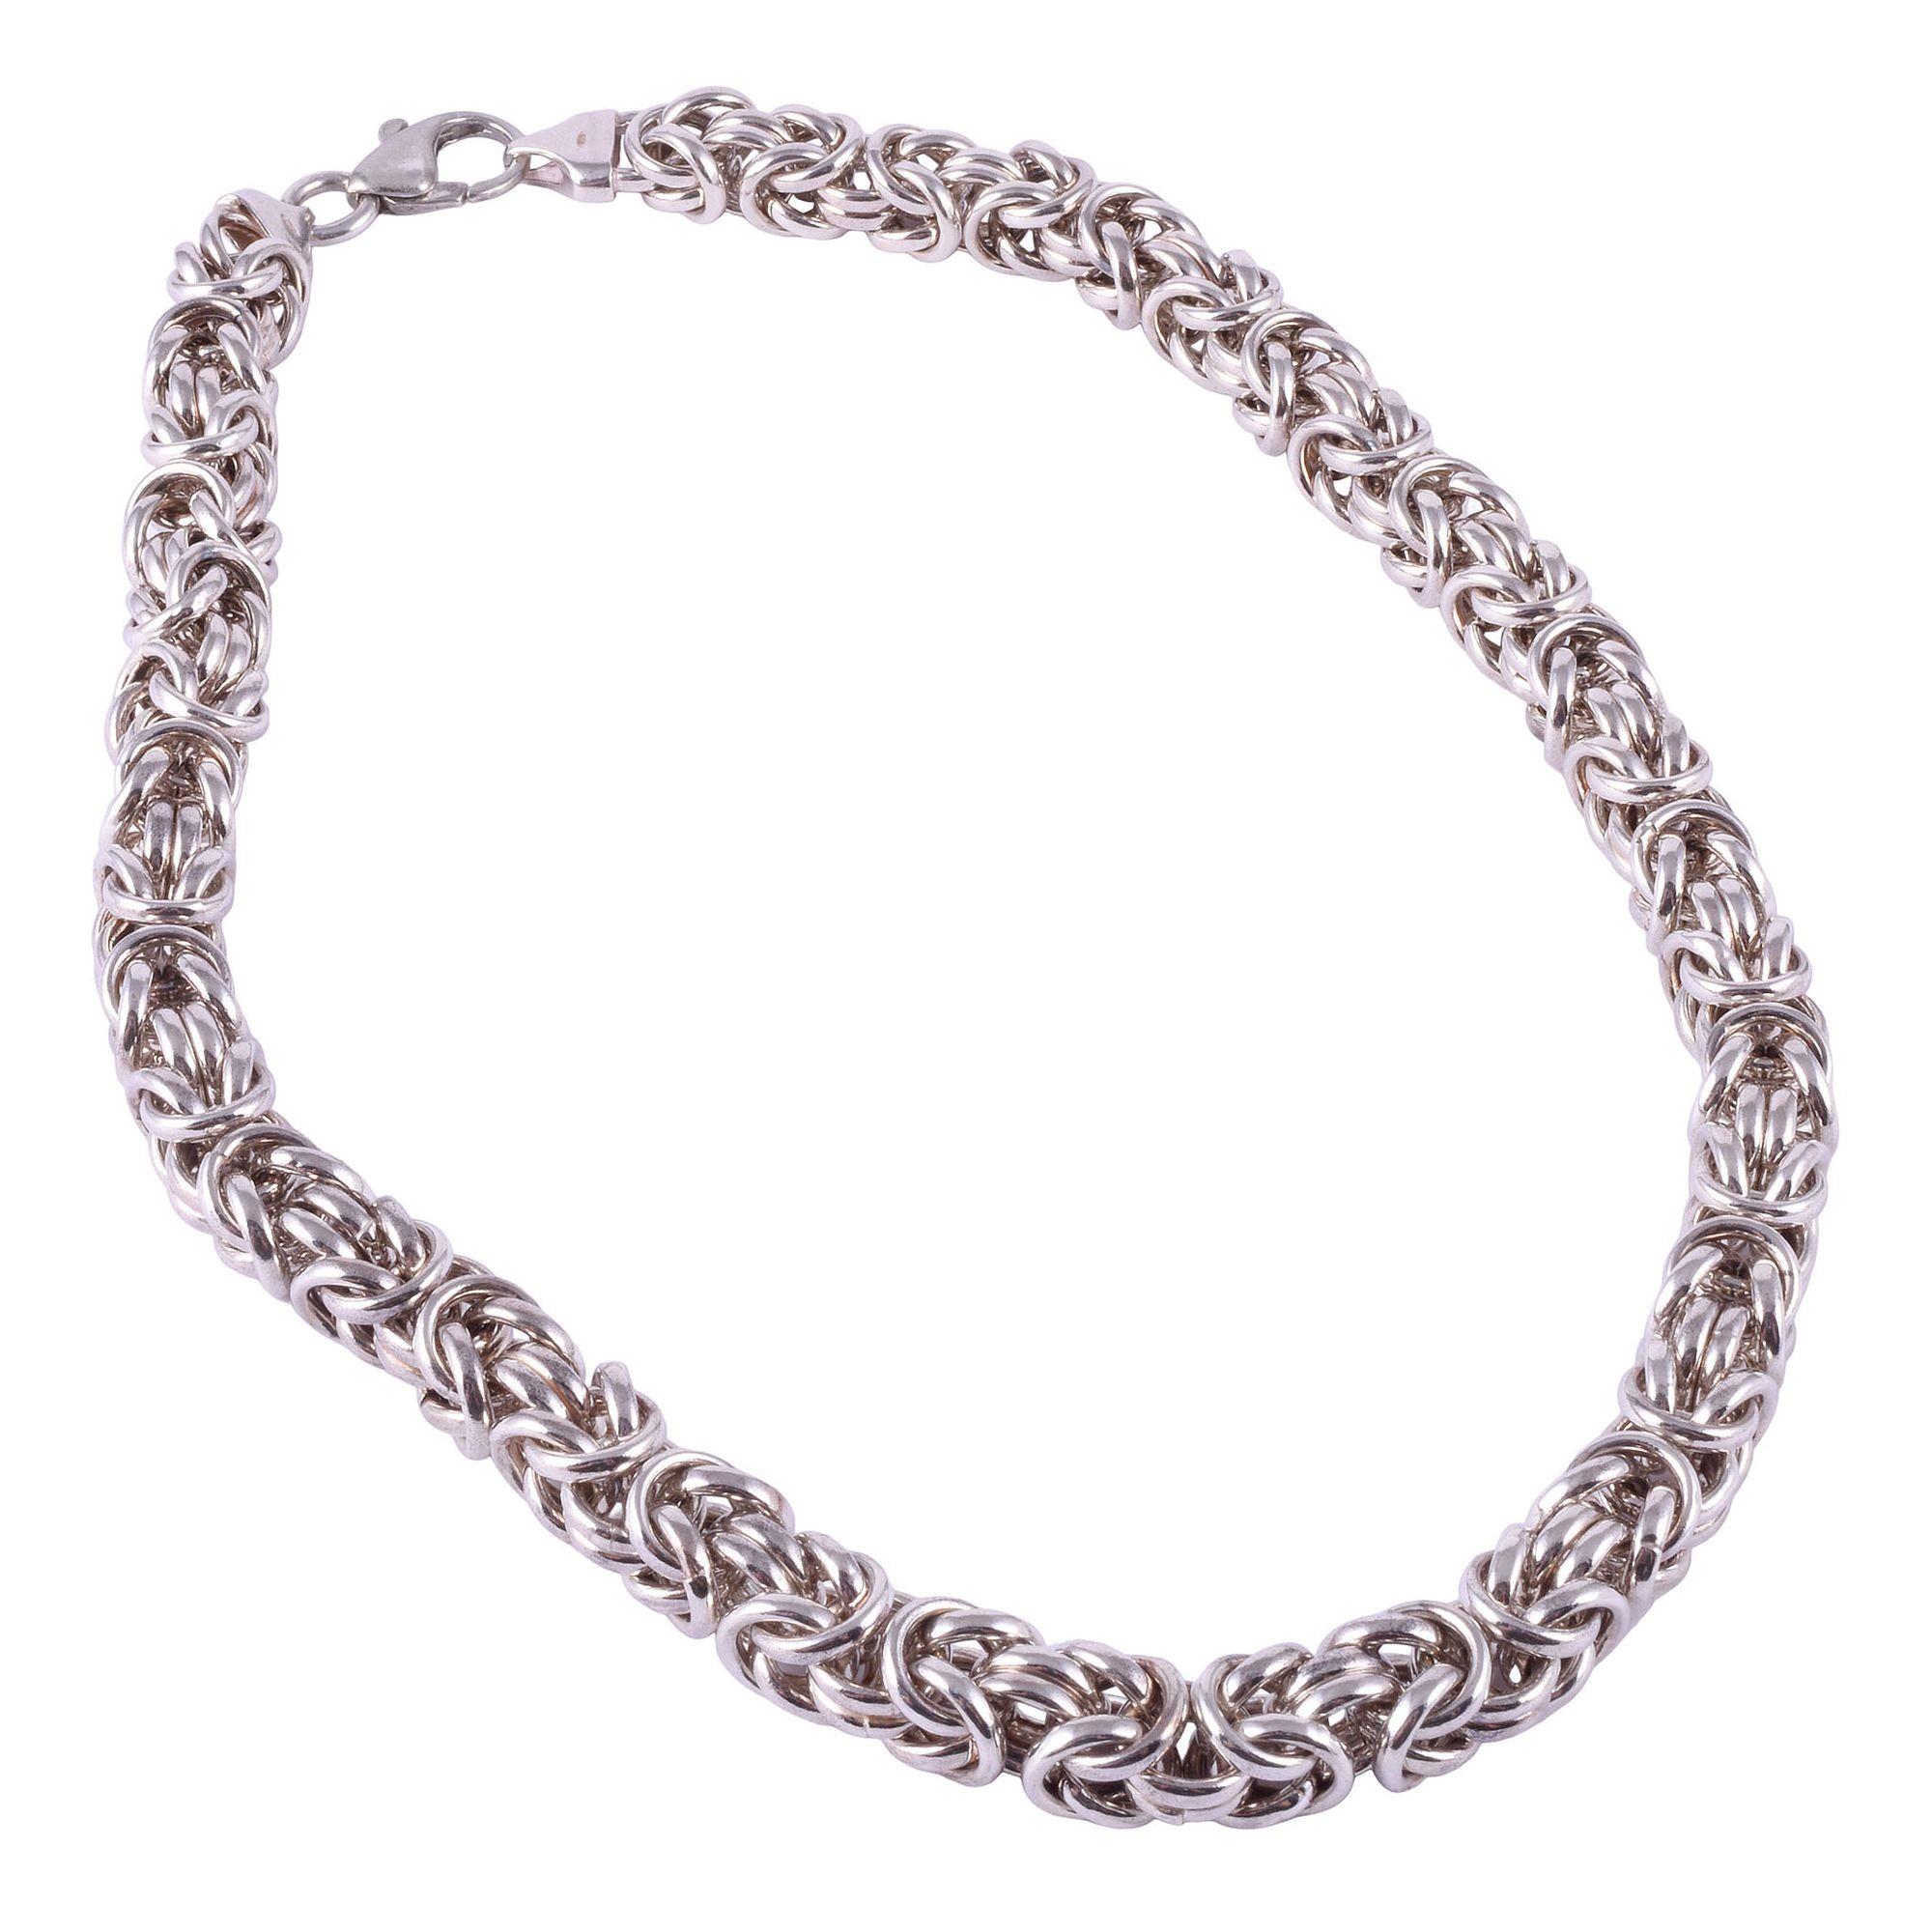 Estate American Modernist Byzantine sterling silver necklace. This Modernist sterling silver necklace features a woven style called Byzantine. The sterling silver Byzantine square chain necklace weighs 107.4 grams. [SJ 1094 P]

Dimensions
15